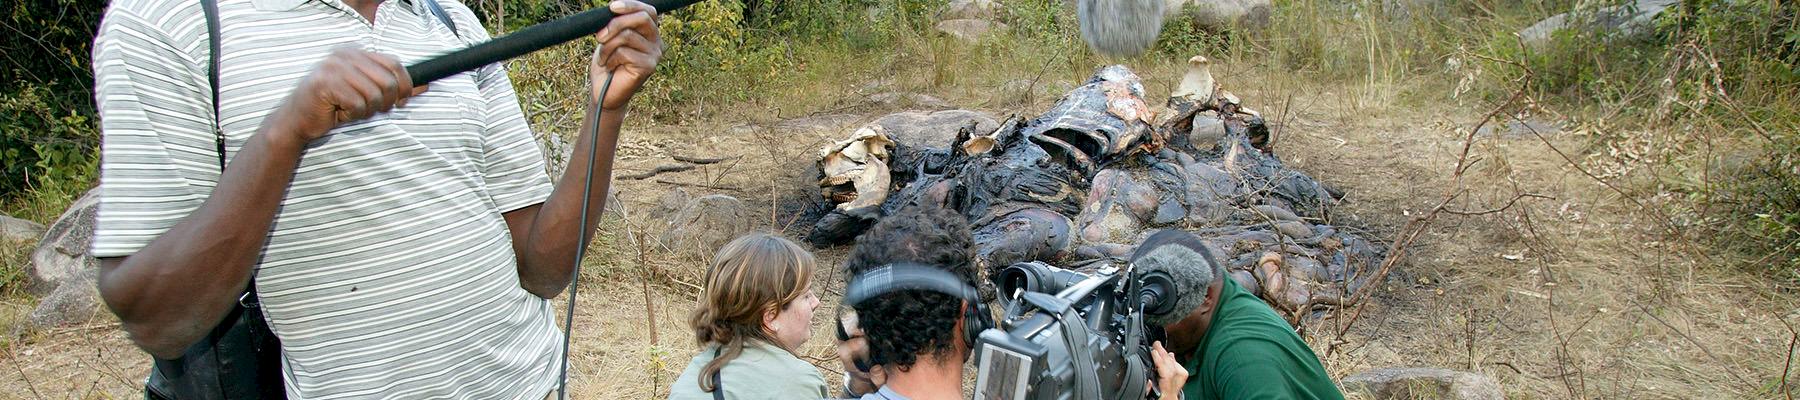 Filming a dead bull elephant in Kenya after it was speared to death by local villagers © Martin Harvey / WWF